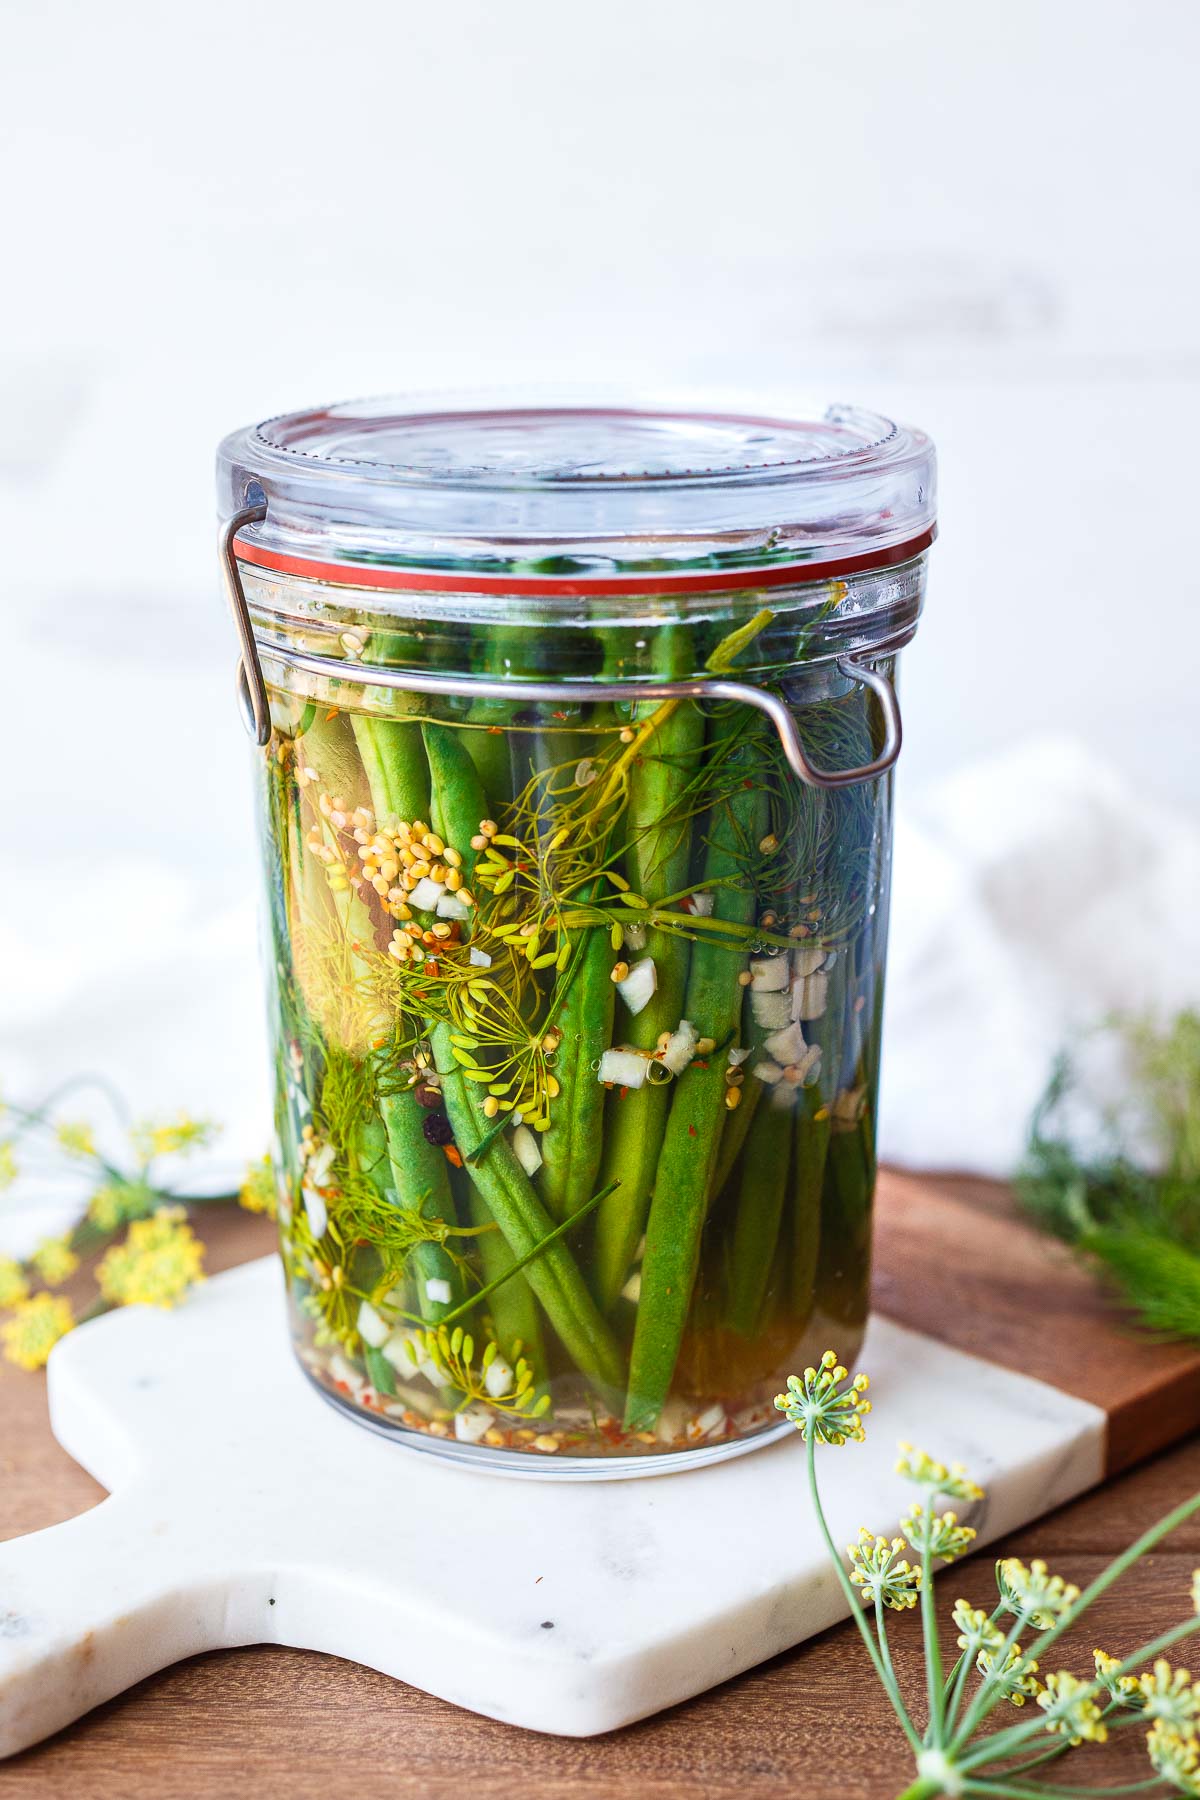 This dilly beans recipe is quick and easy to make and full of tangy dill and garlic flavor.  Crisp and fresh pickled green beans are a tasty way to preserve them and make for a beatuiful gift. 